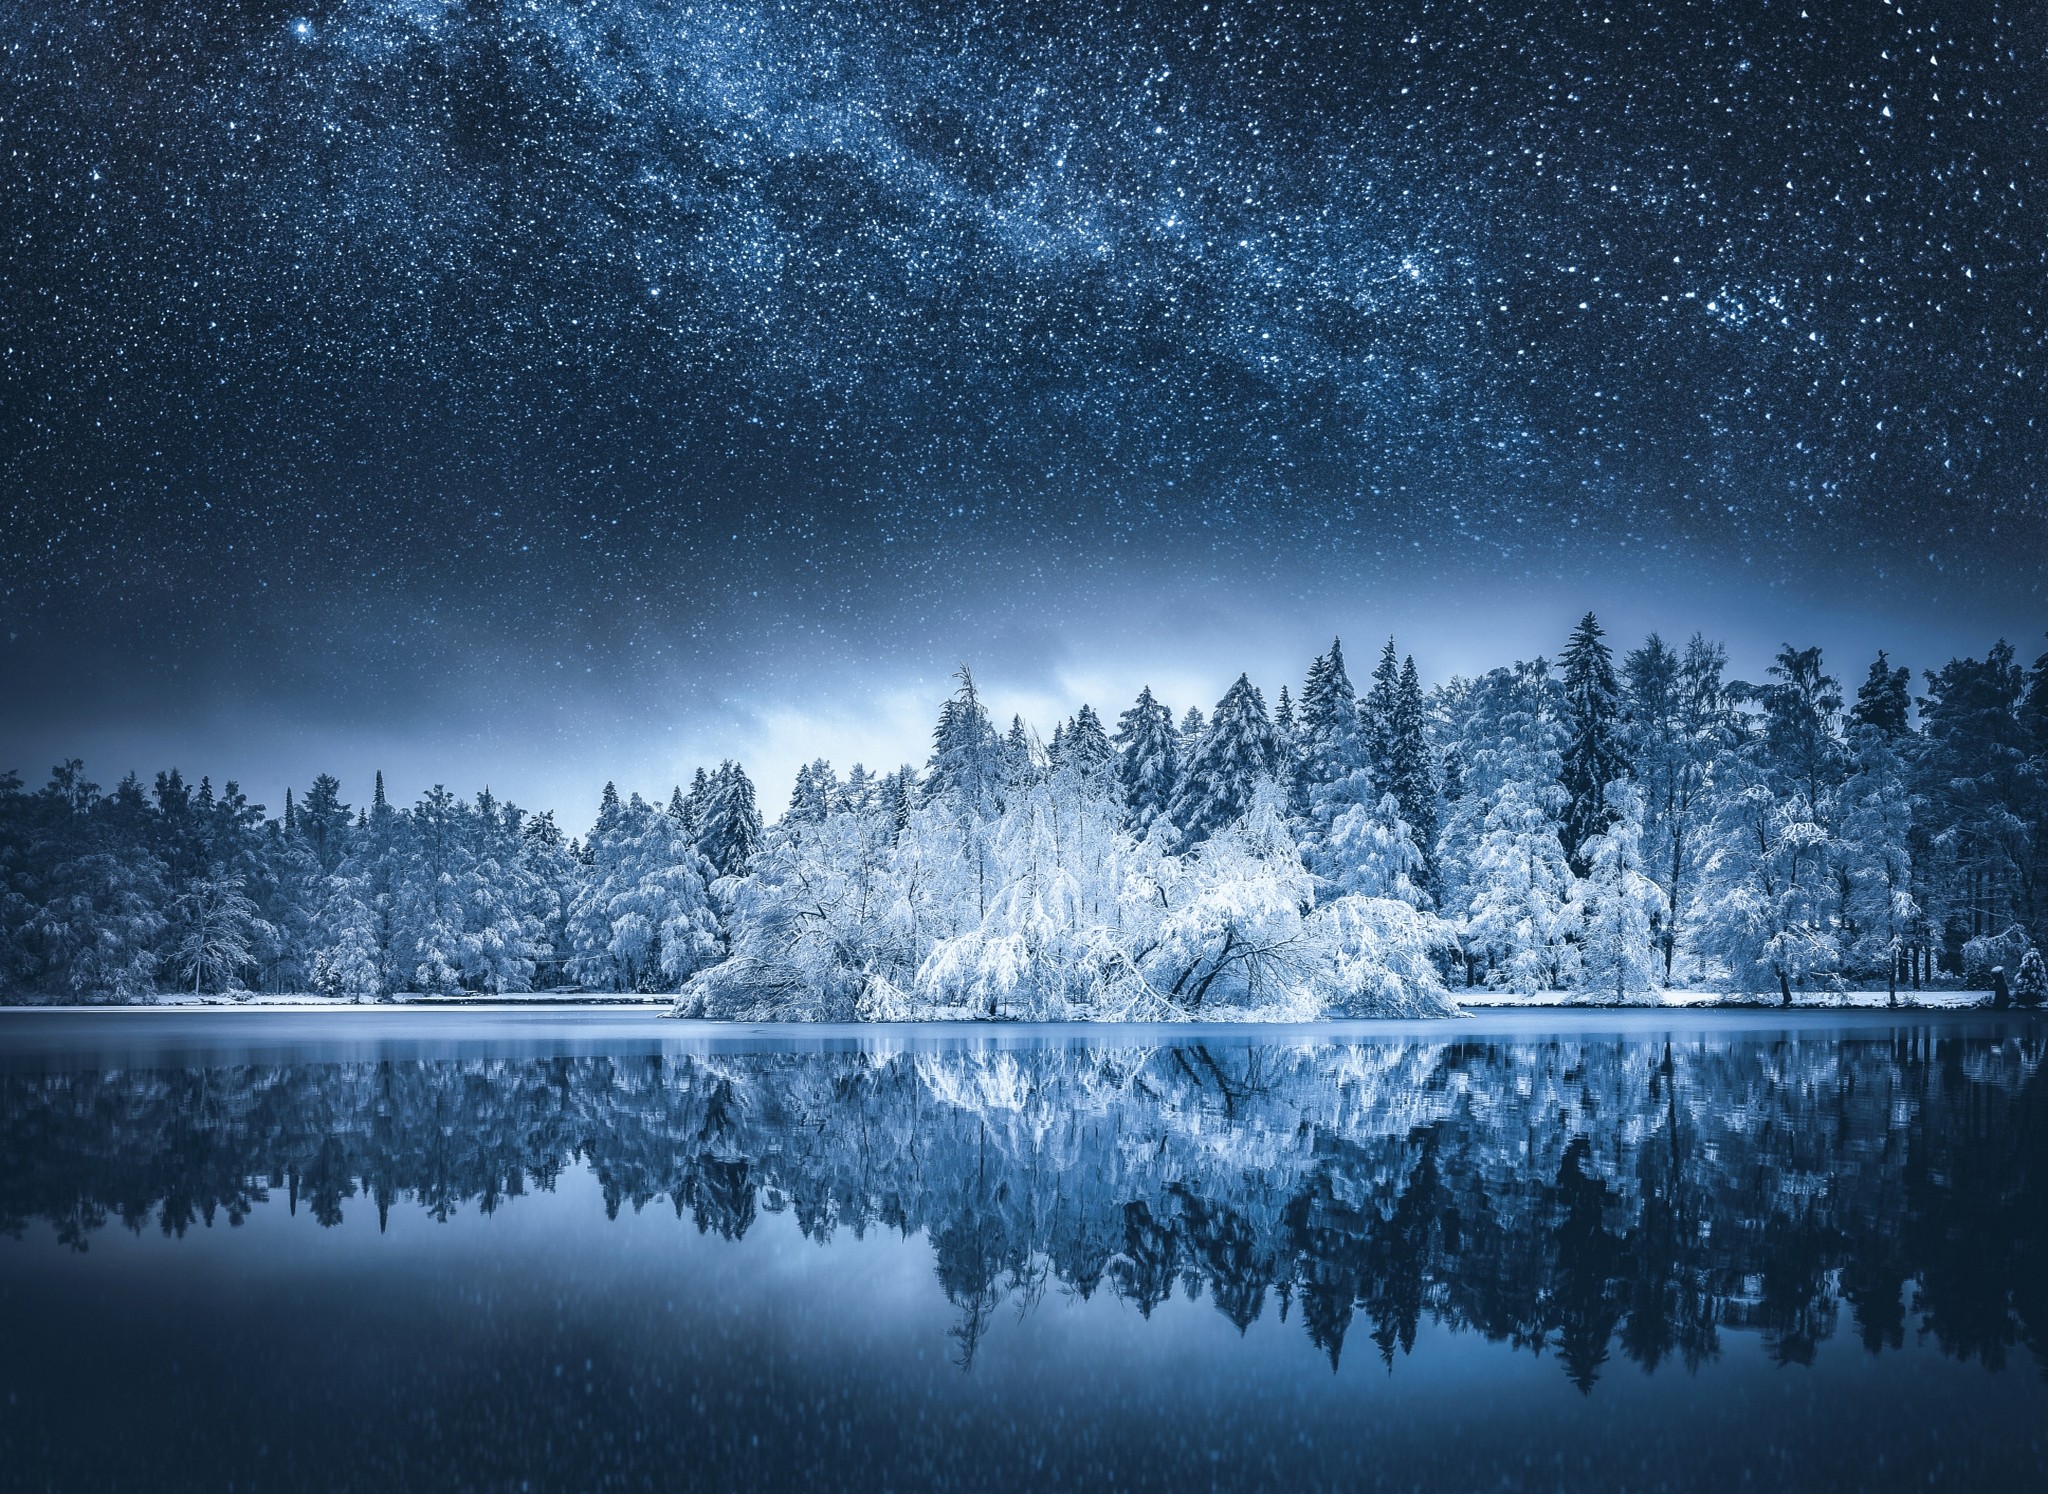 General 2048x1494 nature landscape snow Milky Way lake starry night water reflection forest fall trees Finland long exposure cold outdoors sky stars